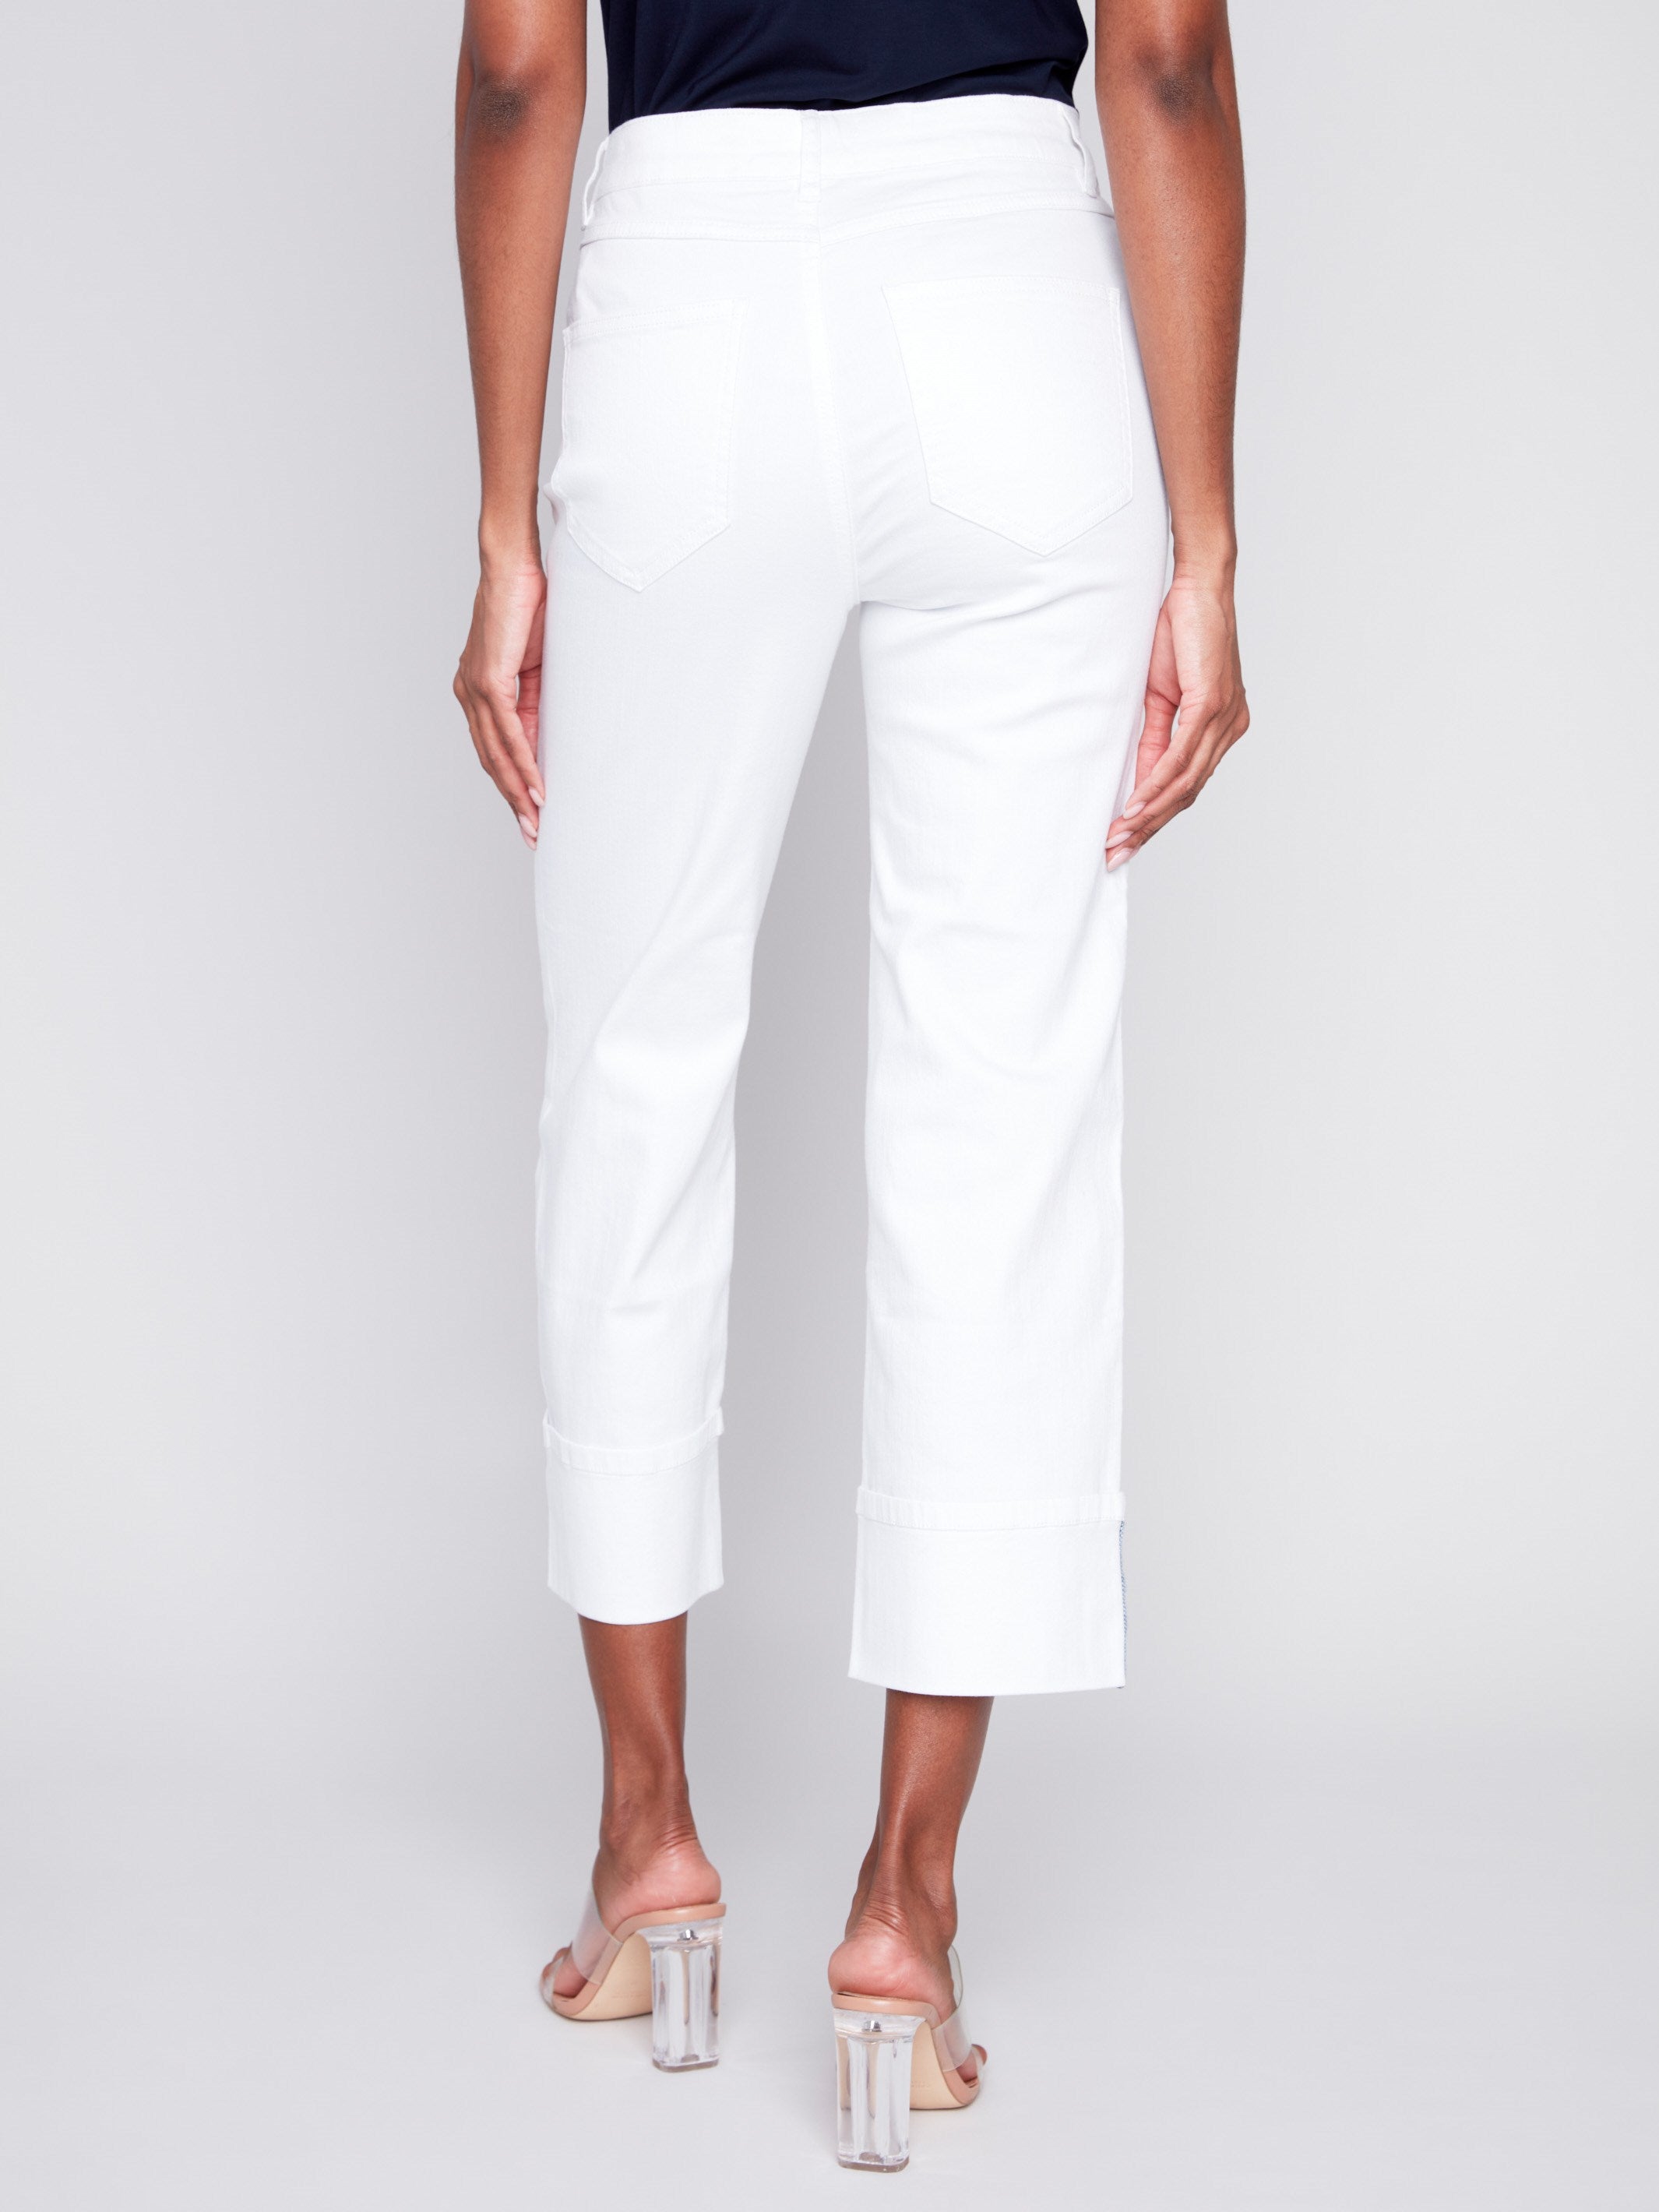 Charlie B Straight Leg Jeans with Folded Cuff - White - Image 3